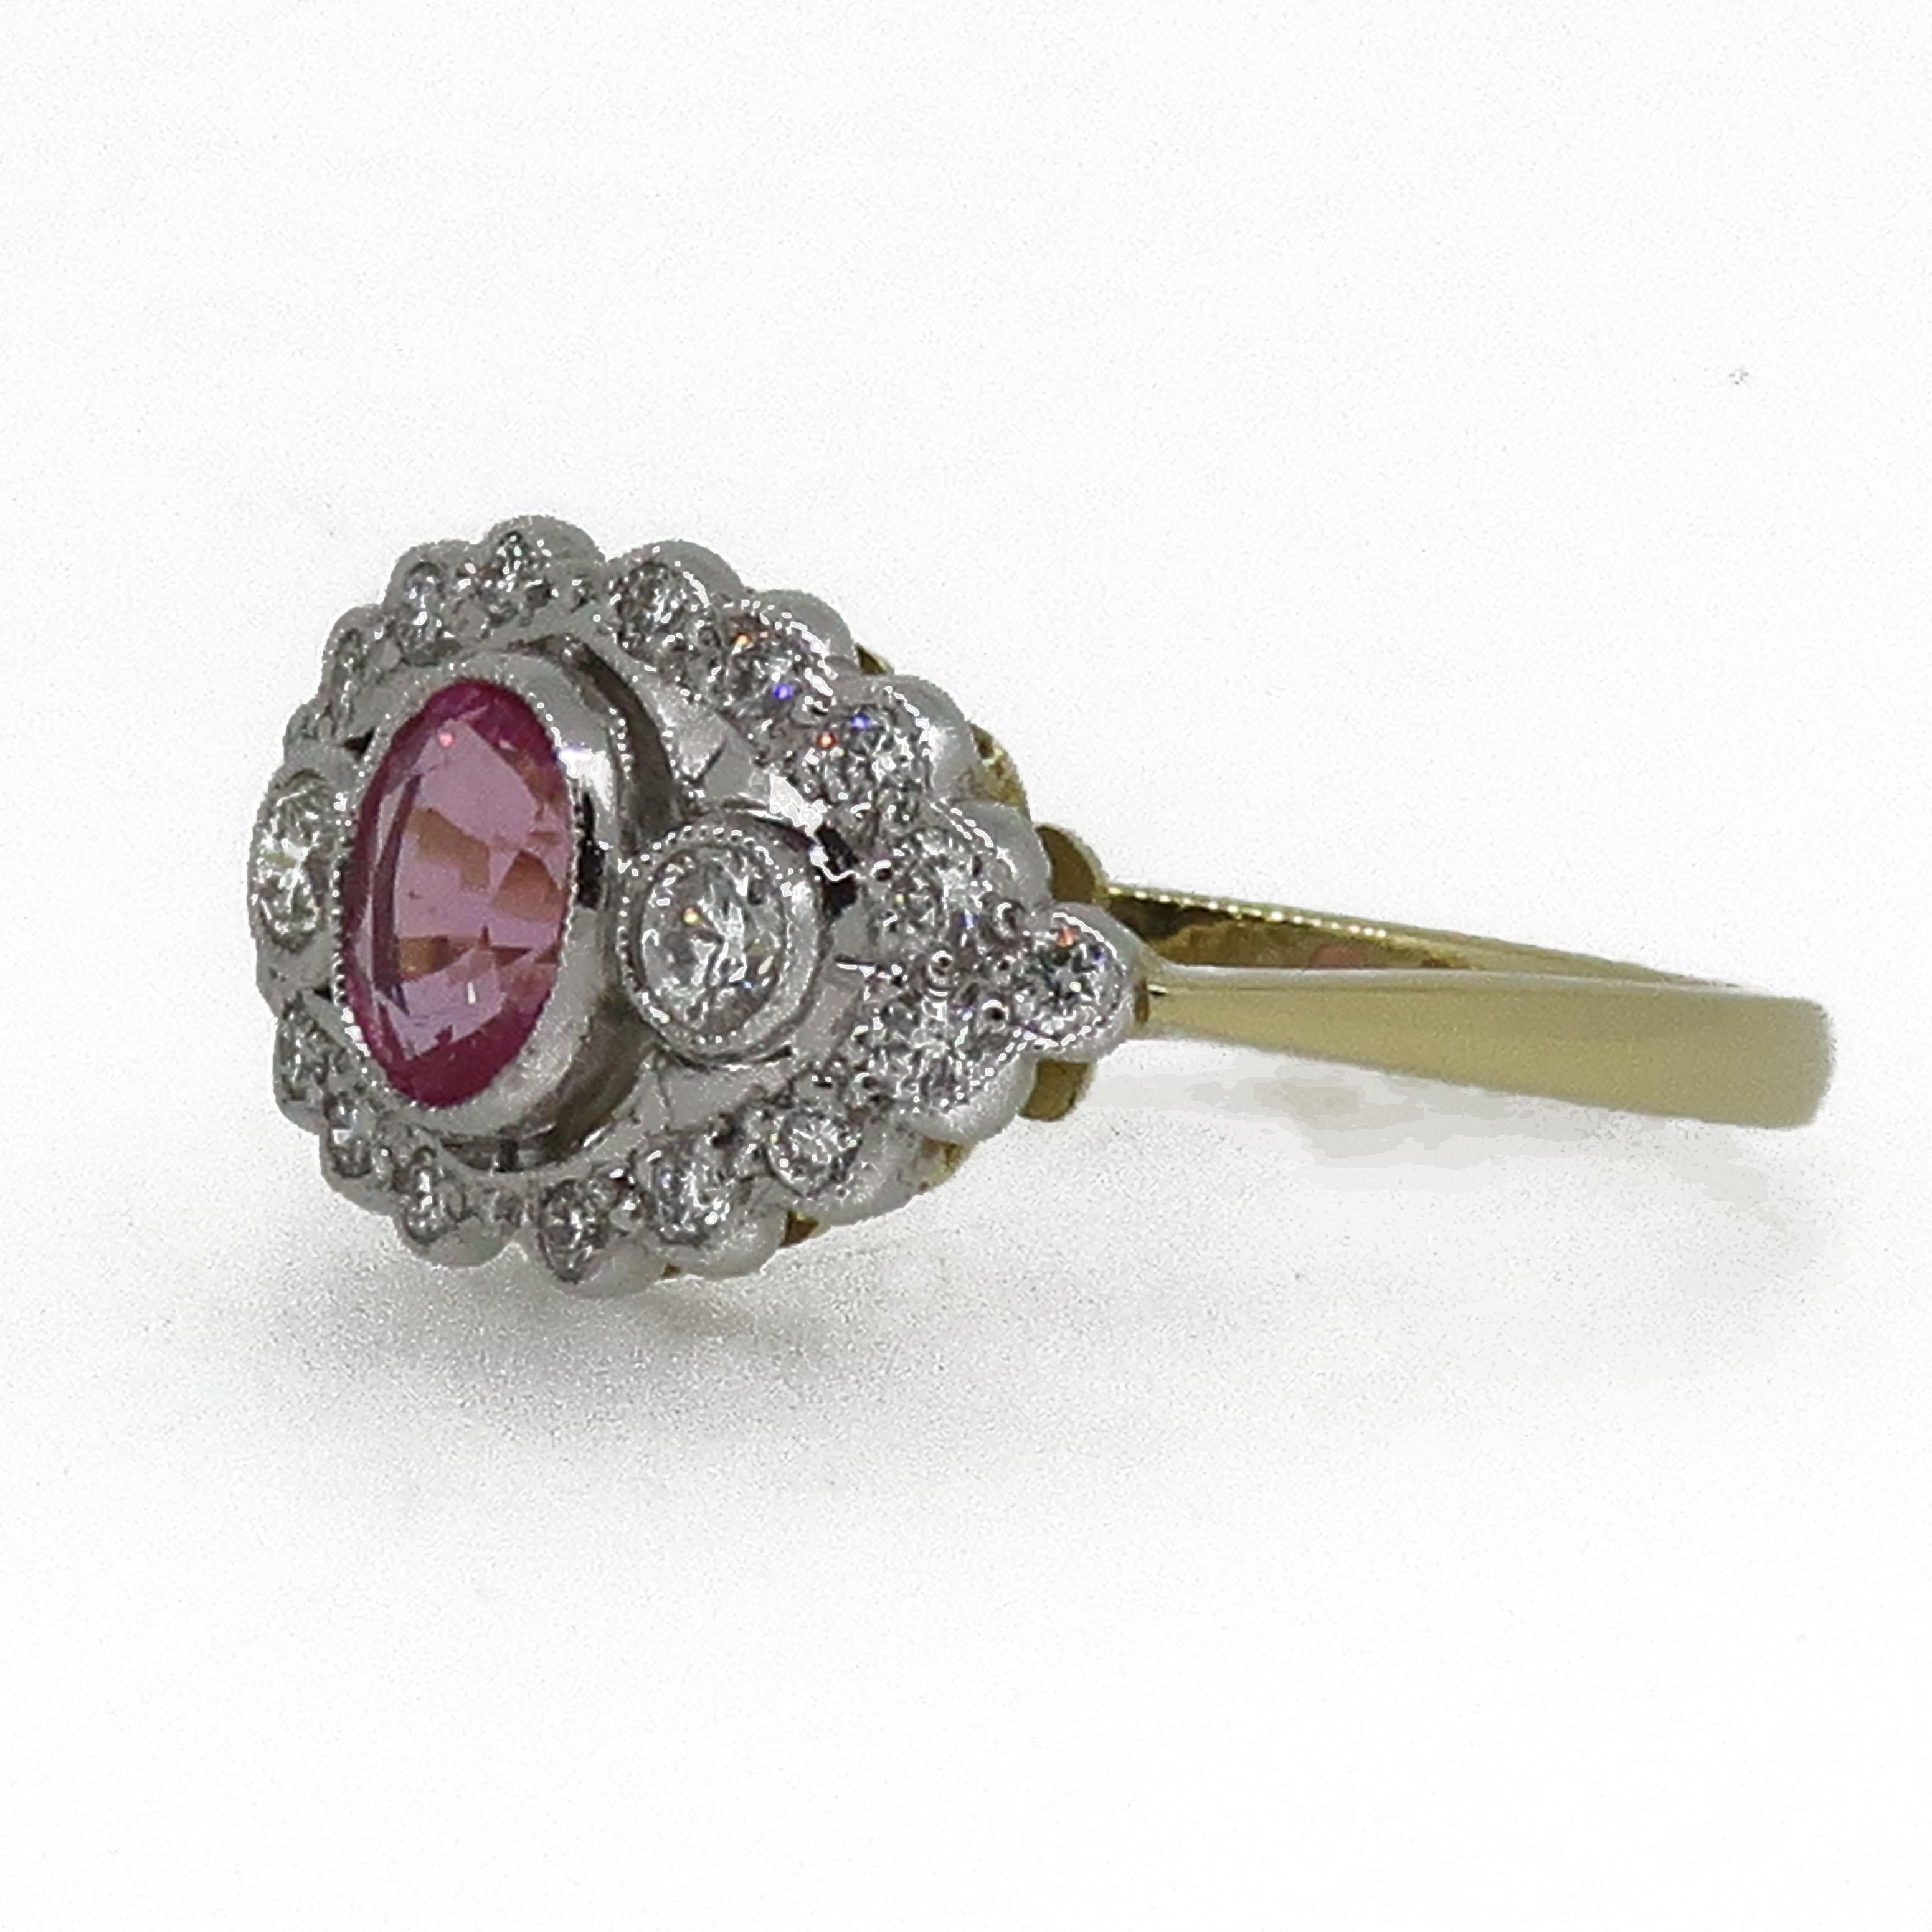 18 Karat Oval Pink Sapphire & Diamond Art Deco Style Cluster Ring

A dazzling oval pink sapphire and diamond ring that sits across the finger. Central oval cut Pink Sapphire & brilliant cut diamond three stone surrounded by a row of white brilliant